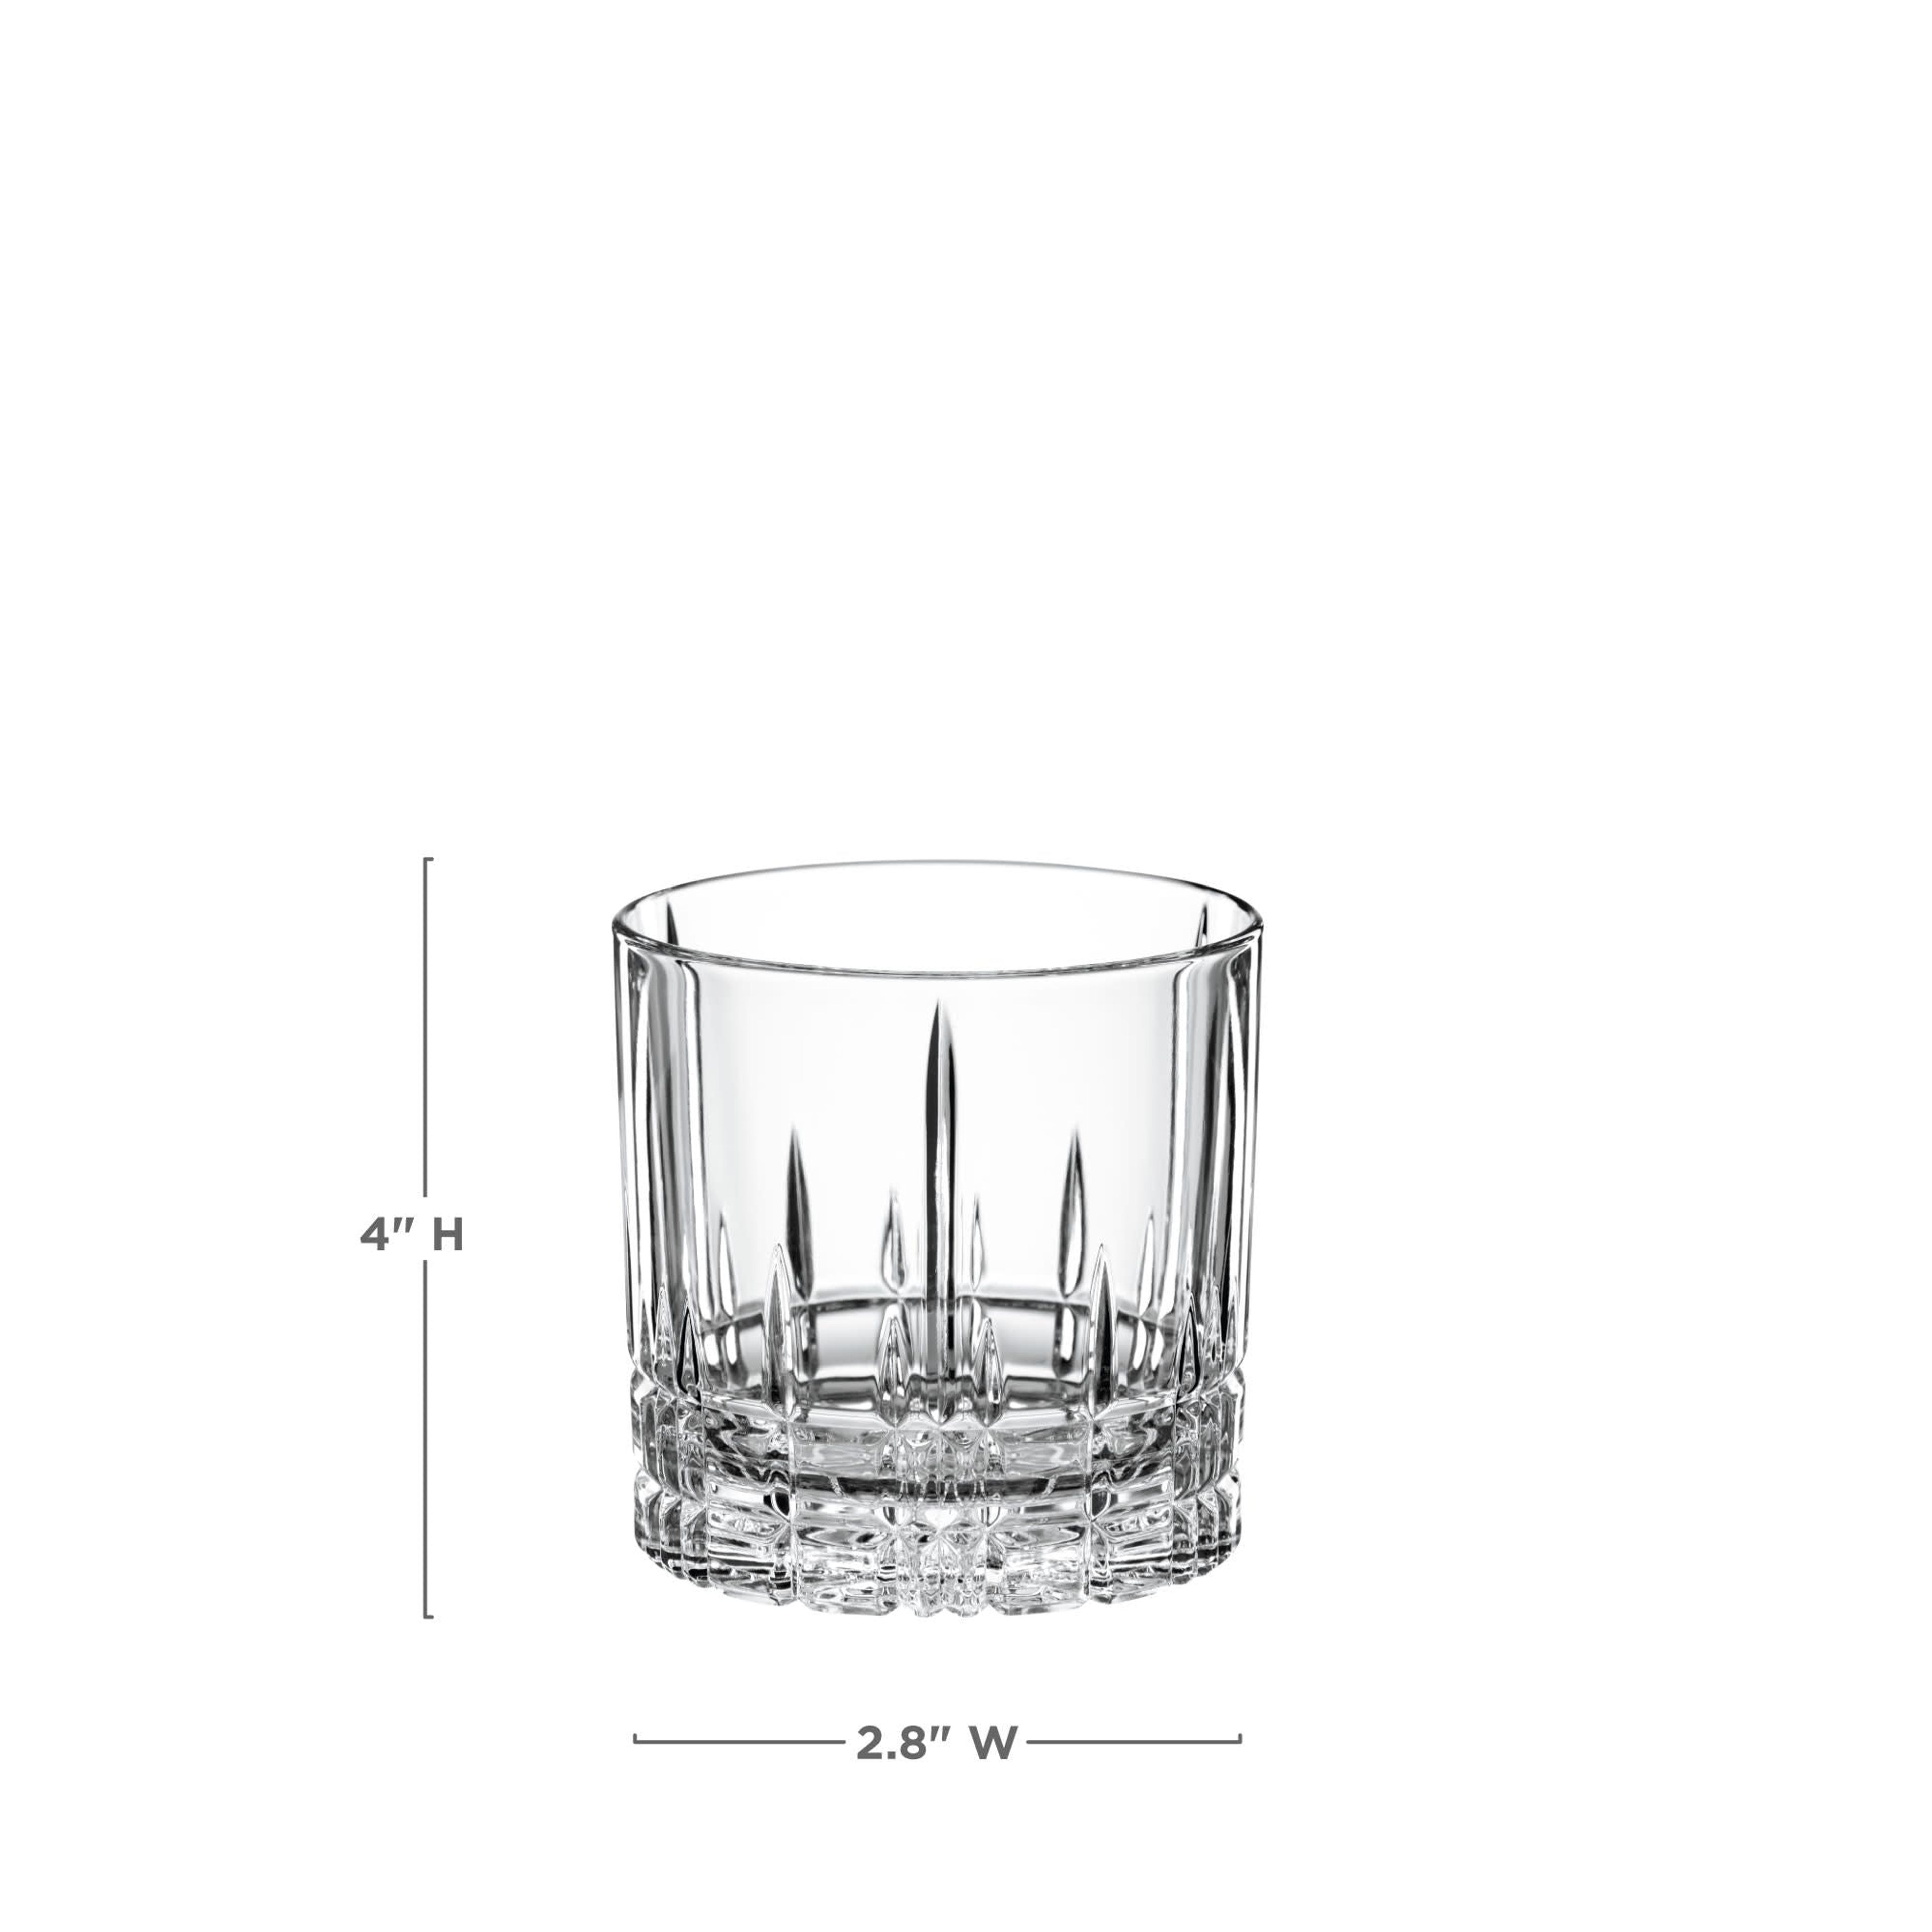 Perfect D.O.F. Glasses (Set of 4) by Spiegelau